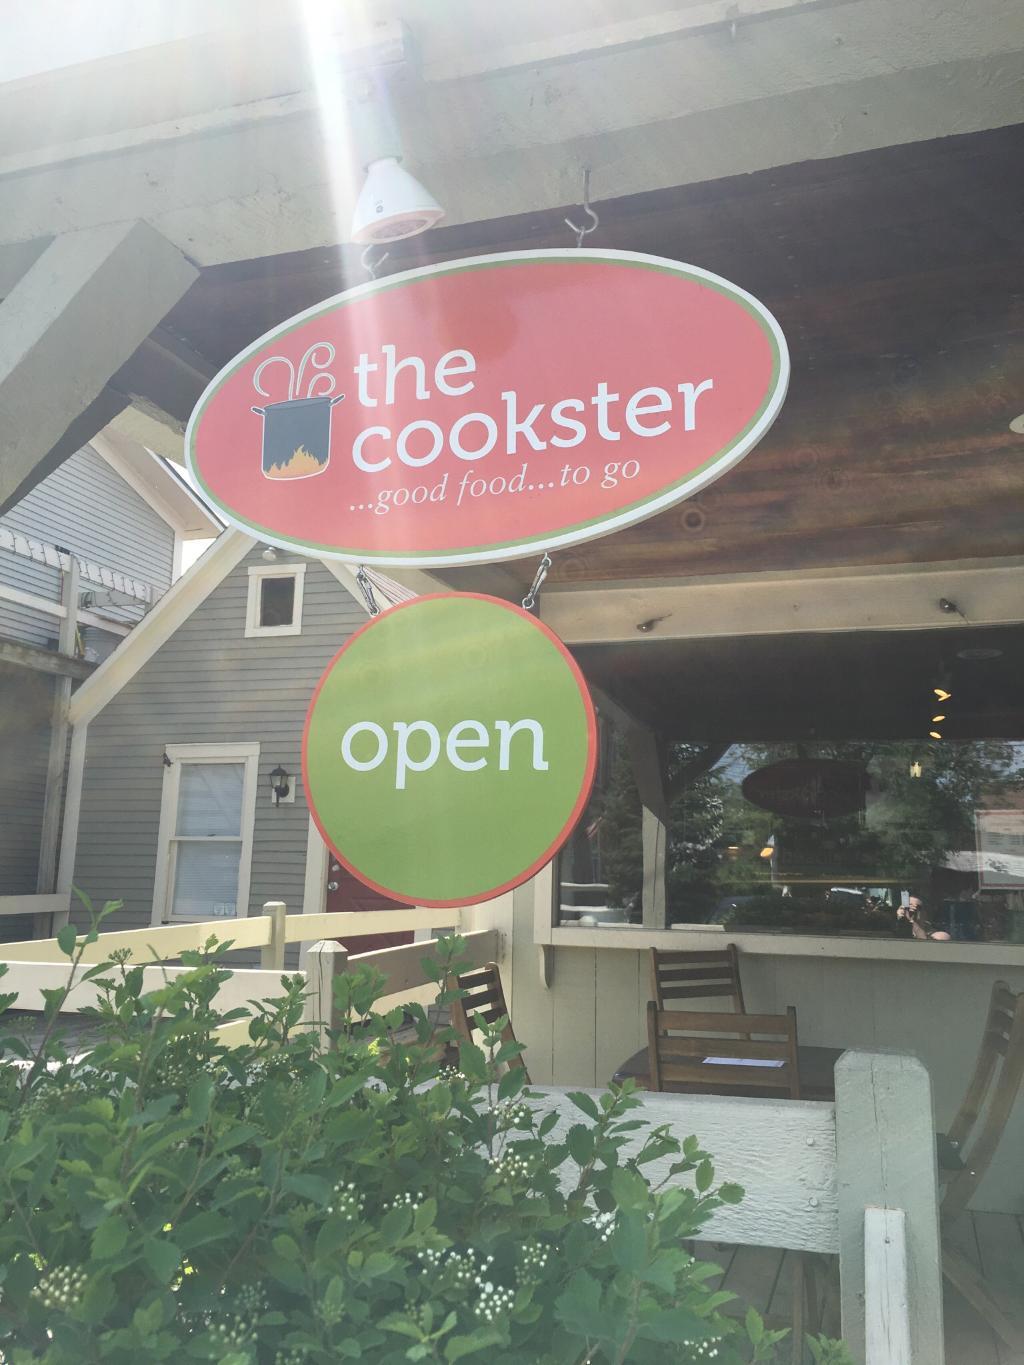 The Cookster